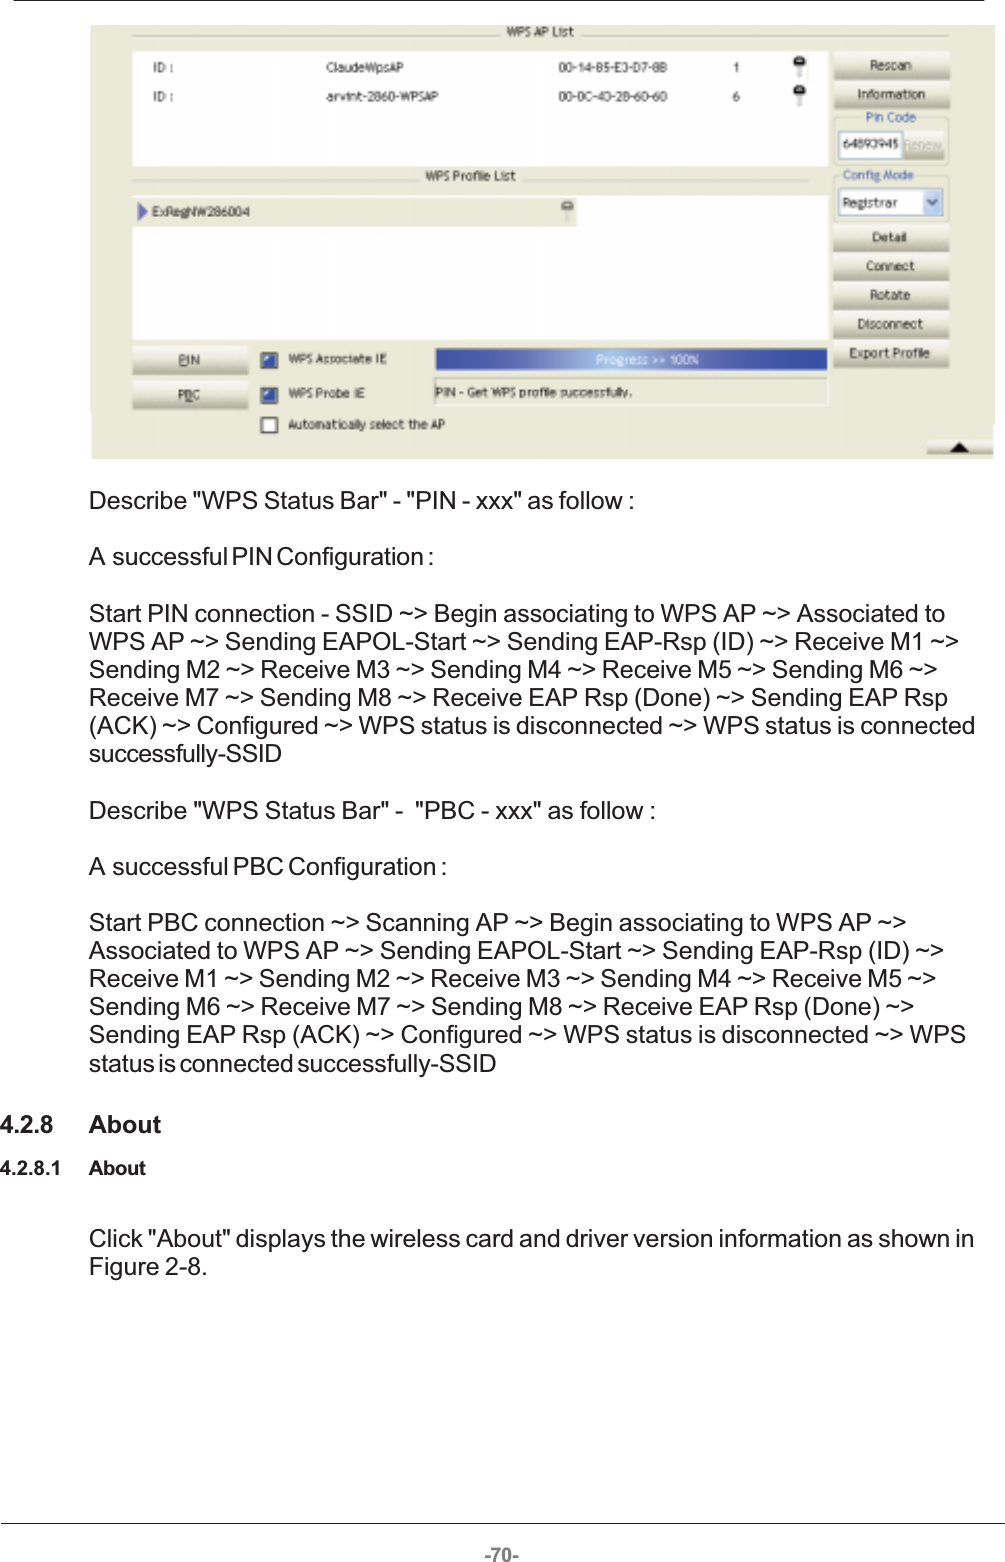 -70- Describe &quot;WPS Status Bar&quot; - &quot;PIN - xxx&quot; as follow : A successful PIN Configuration : Start PIN connection - SSID ~&gt; Begin associating to WPS AP ~&gt; Associated toWPS AP ~&gt; Sending EAPOL-Start ~&gt; Sending EAP-Rsp (ID) ~&gt; Receive M1 ~&gt;Sending M2 ~&gt; Receive M3 ~&gt; Sending M4 ~&gt; Receive M5 ~&gt; Sending M6 ~&gt;Receive M7 ~&gt; Sending M8 ~&gt; Receive EAP Rsp (Done) ~&gt; Sending EAP Rsp(ACK) ~&gt; Configured ~&gt; WPS status is disconnected ~&gt; WPS status is connectedsuccessfully-SSID Describe &quot;WPS Status Bar&quot; -  &quot;PBC - xxx&quot; as follow : A  successful PBC Configuration : Start PBC connection ~&gt; Scanning AP ~&gt; Begin associating to WPS AP ~&gt;Associated to WPS AP ~&gt; Sending EAPOL-Start ~&gt; Sending EAP-Rsp (ID) ~&gt;Receive M1 ~&gt; Sending M2 ~&gt; Receive M3 ~&gt; Sending M4 ~&gt; Receive M5 ~&gt;Sending M6 ~&gt; Receive M7 ~&gt; Sending M8 ~&gt; Receive EAP Rsp (Done) ~&gt;Sending EAP Rsp (ACK) ~&gt; Configured ~&gt; WPS status is disconnected ~&gt; WPSstatus is connected successfully-SSID4.2.8 About4.2.8.1 AboutClick &quot;About&quot; displays the wireless card and driver version information as shown inFigure 2-8. 